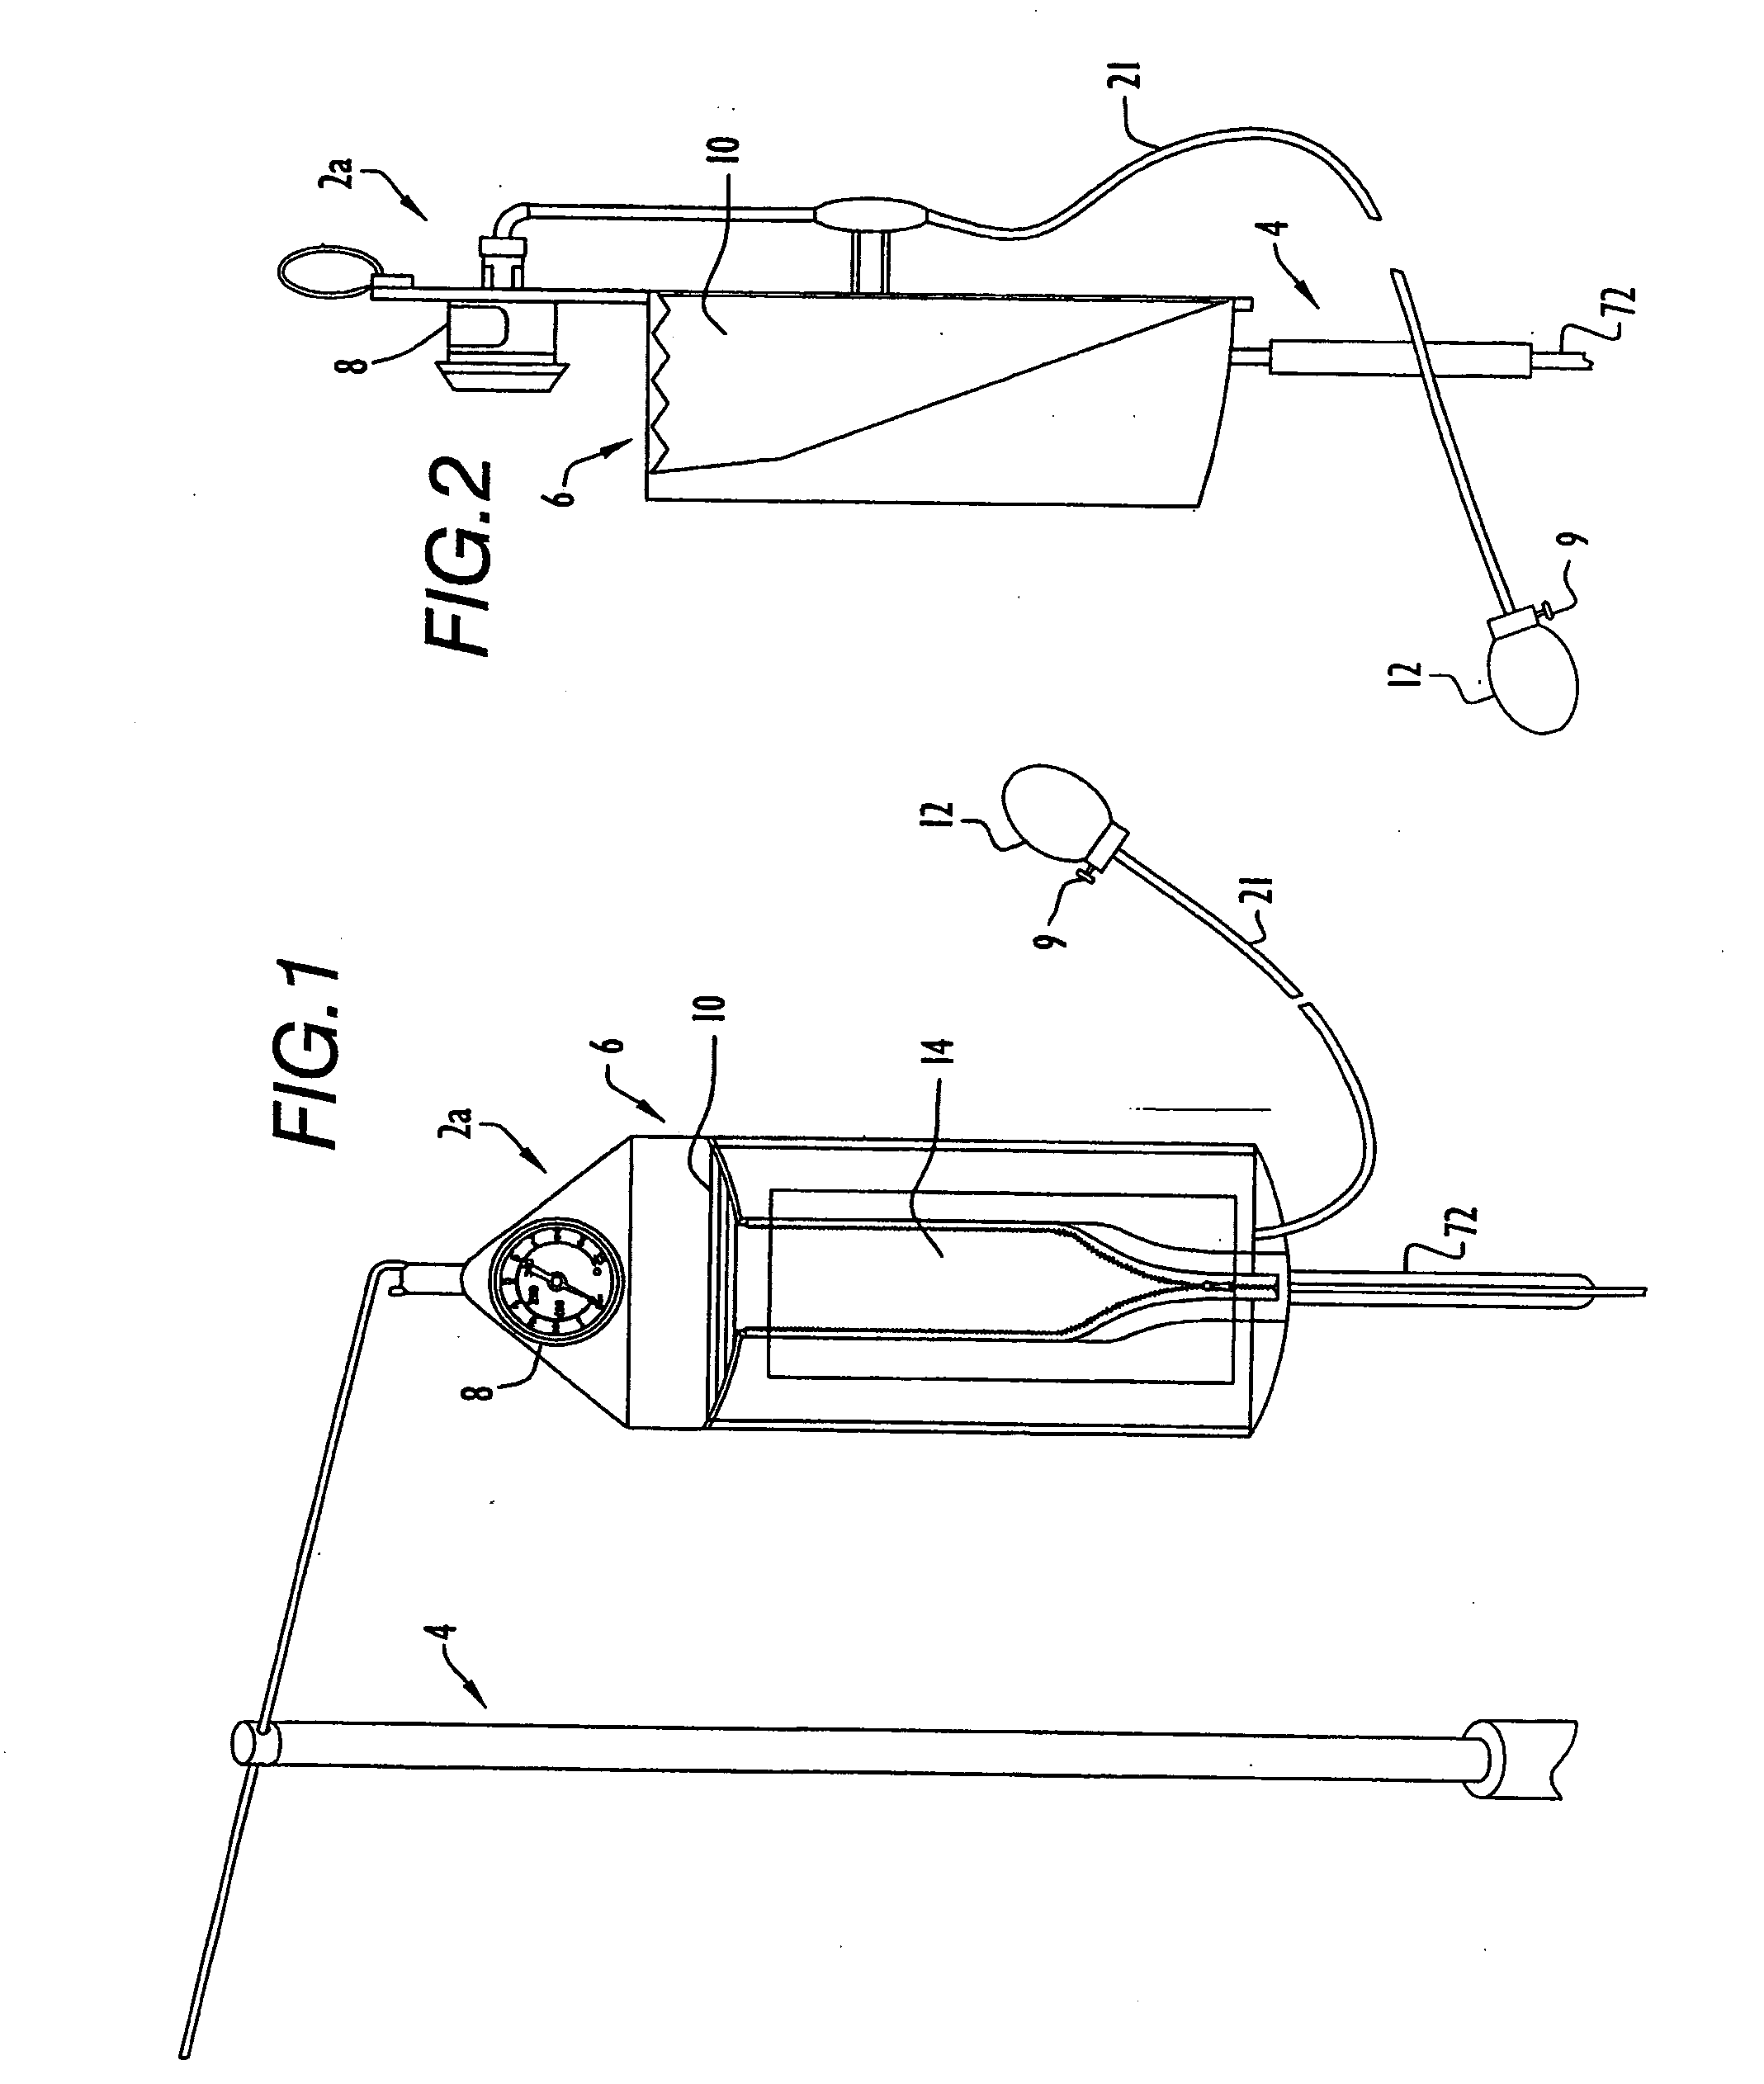 Method and Apparatus for Pressure Infusion and Temperature Control of Infused Liquids